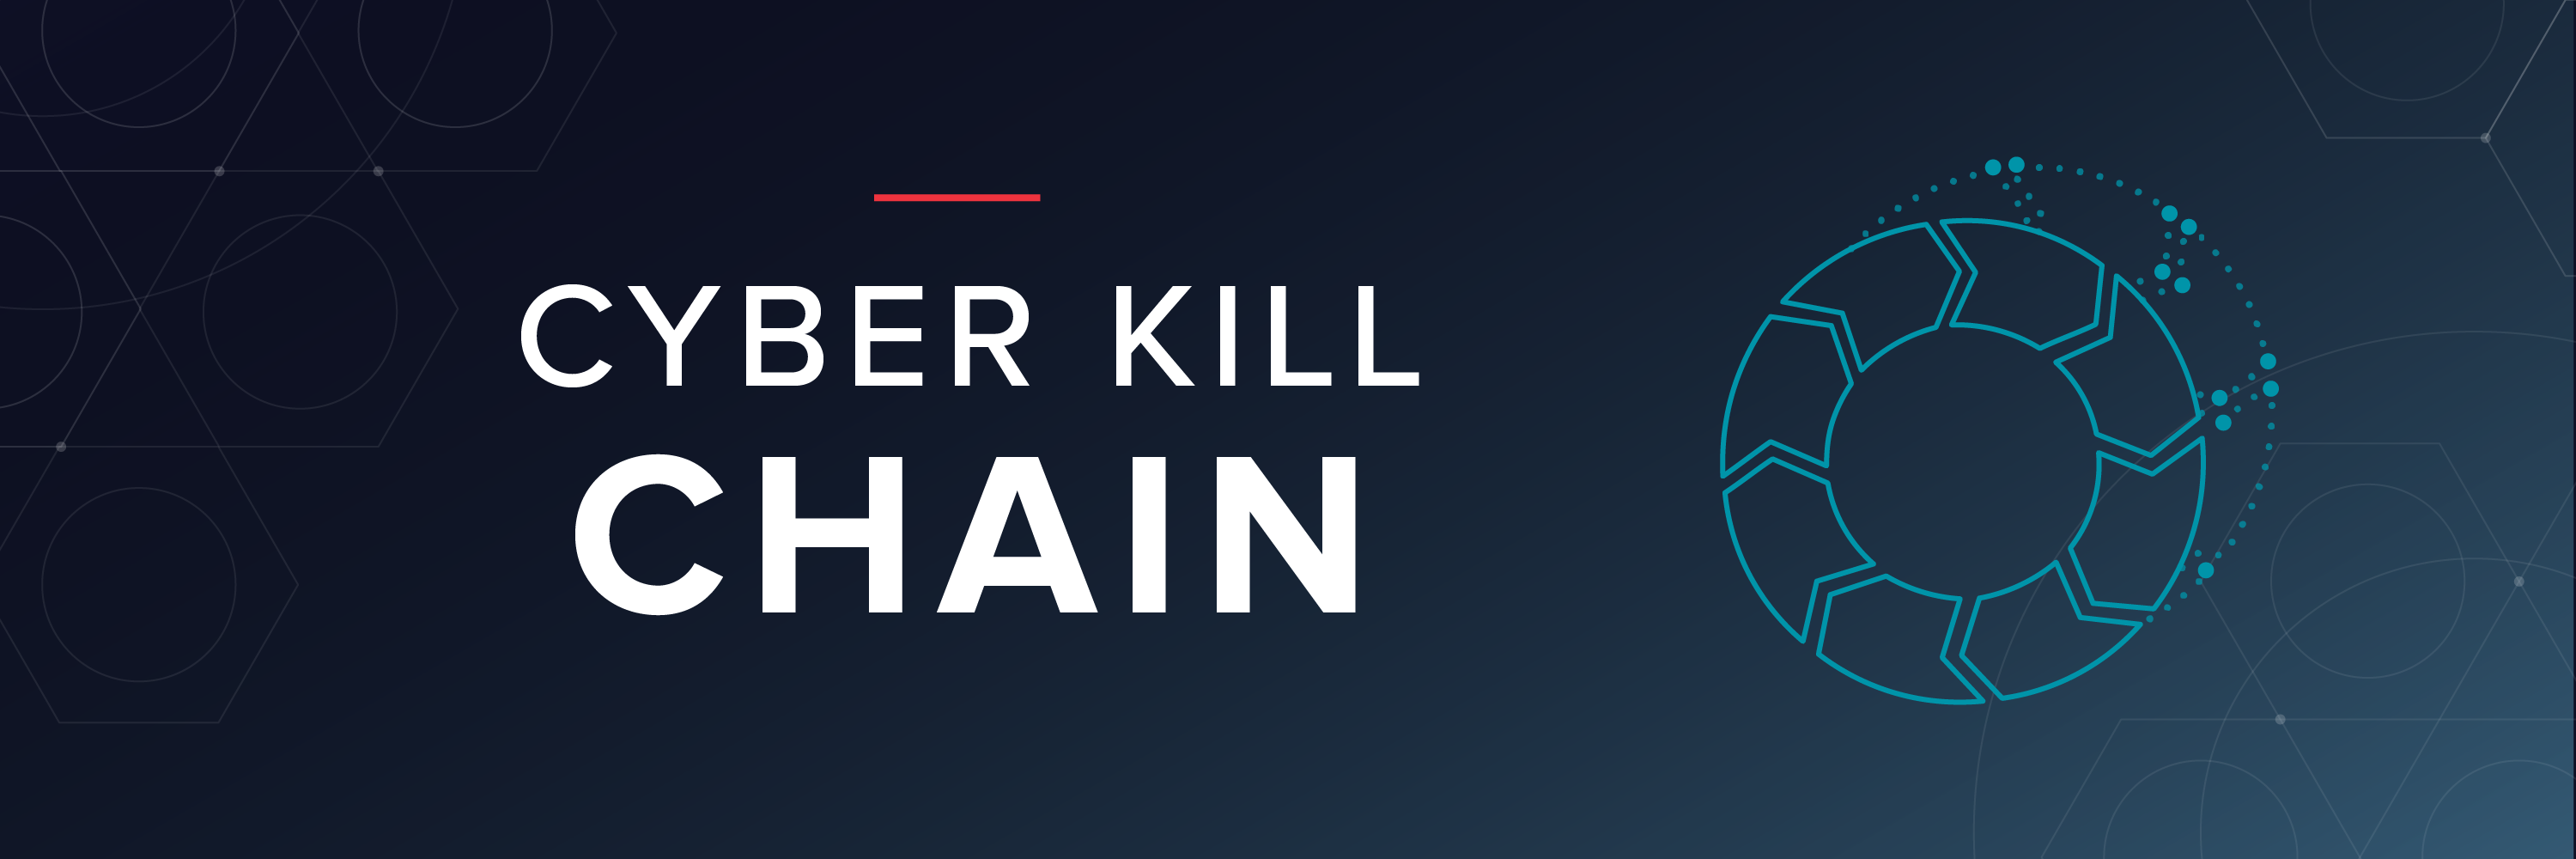 What is The Cyber Kill Chain and How to Use it Effectively